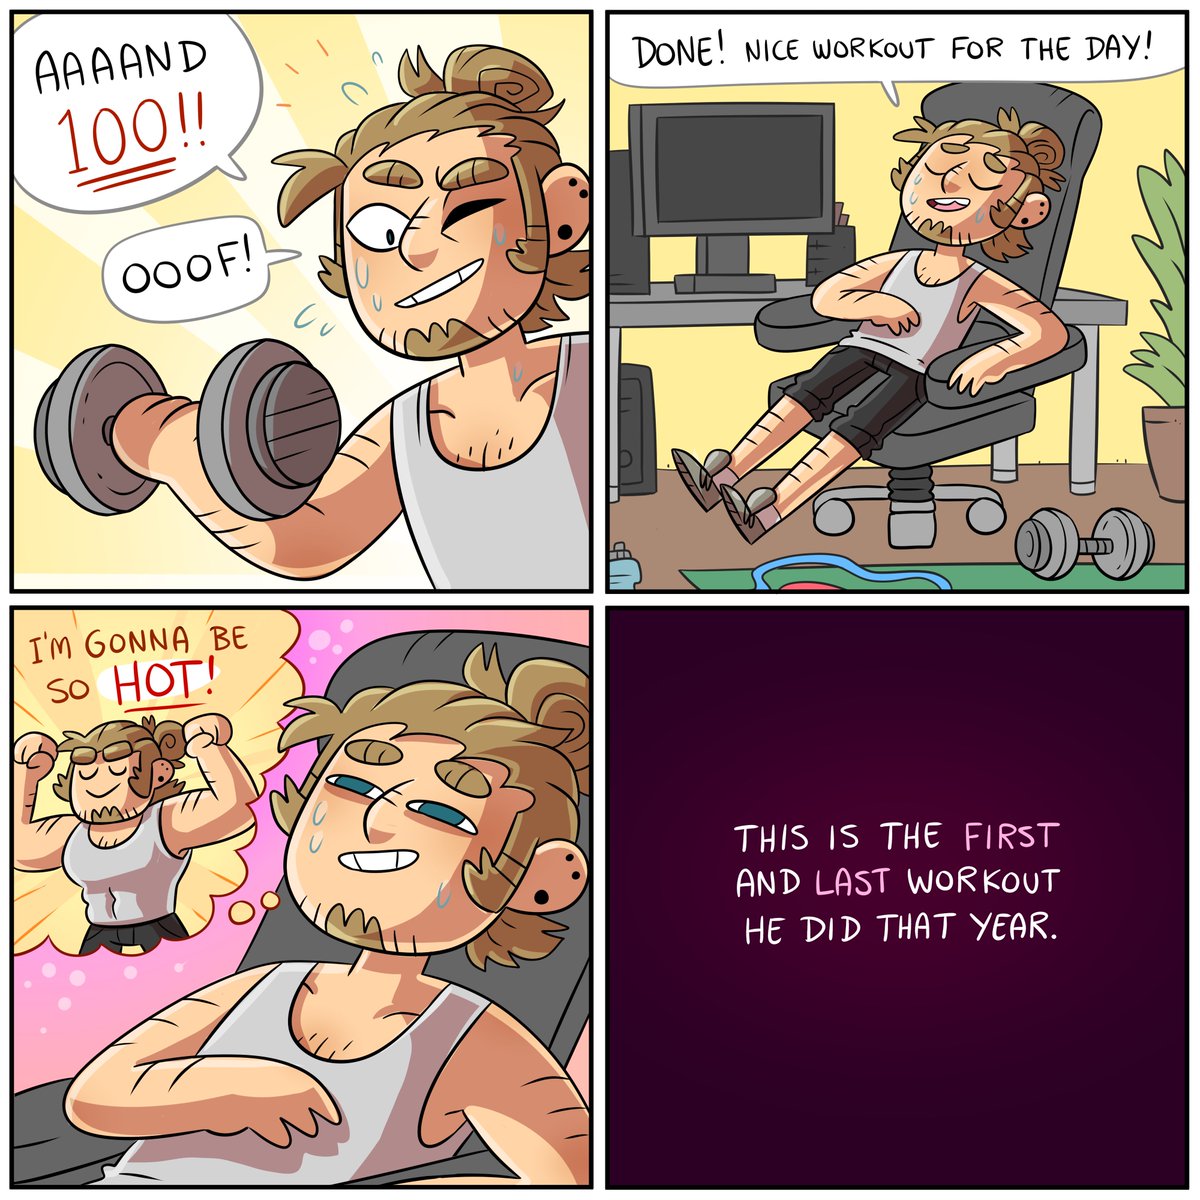 The Workout Trilogy
(it didn't work out)

(1/3) 